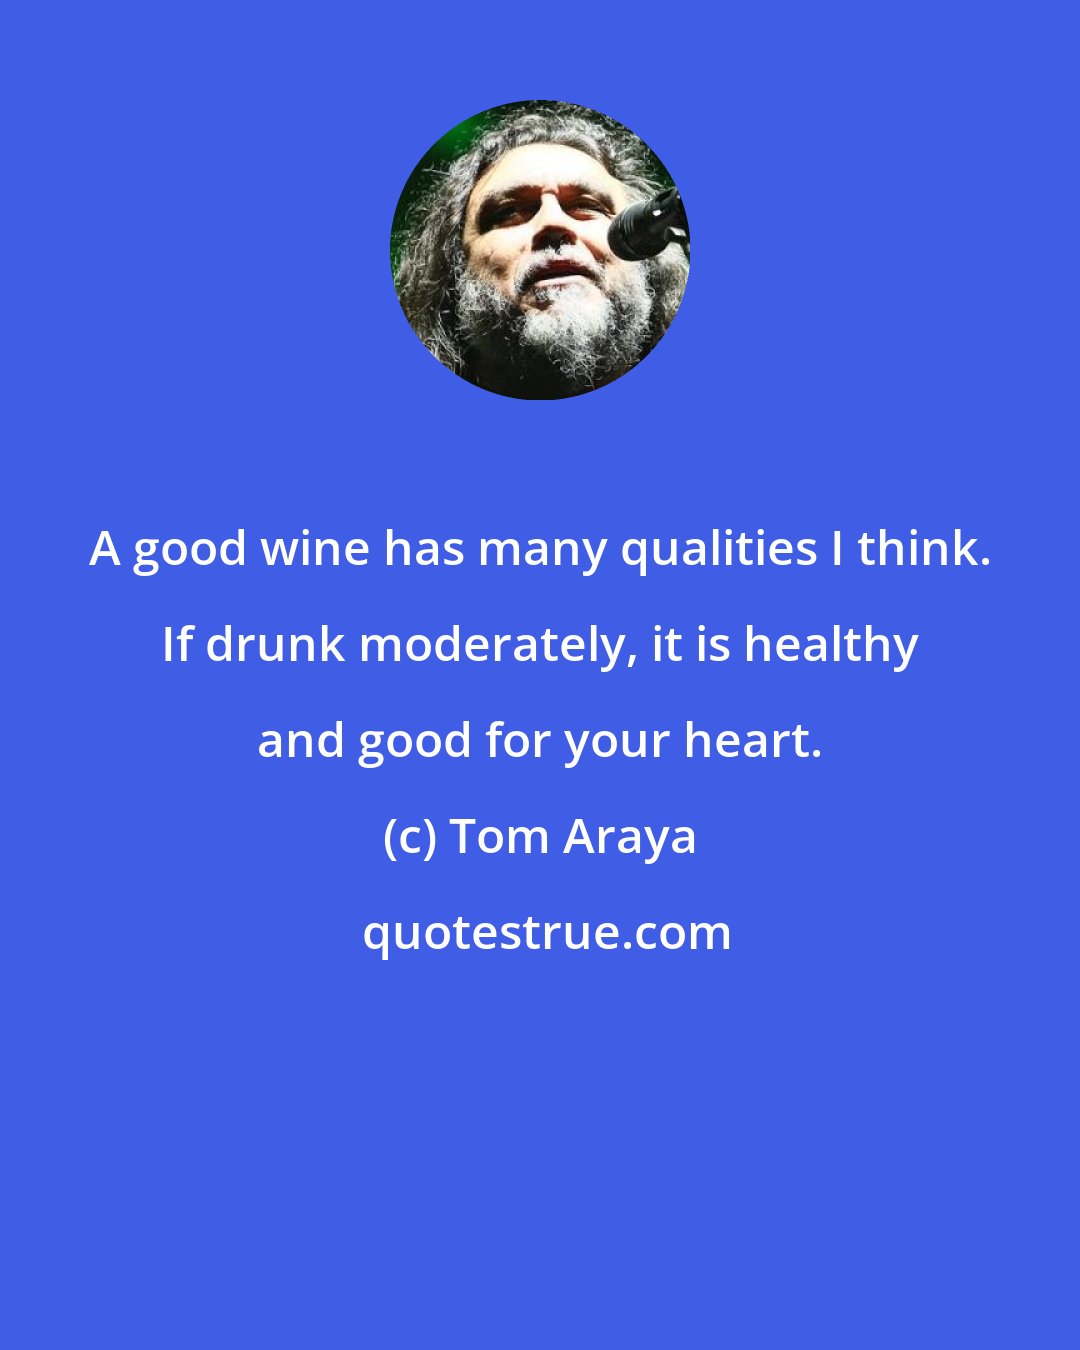 Tom Araya: A good wine has many qualities I think. If drunk moderately, it is healthy and good for your heart.